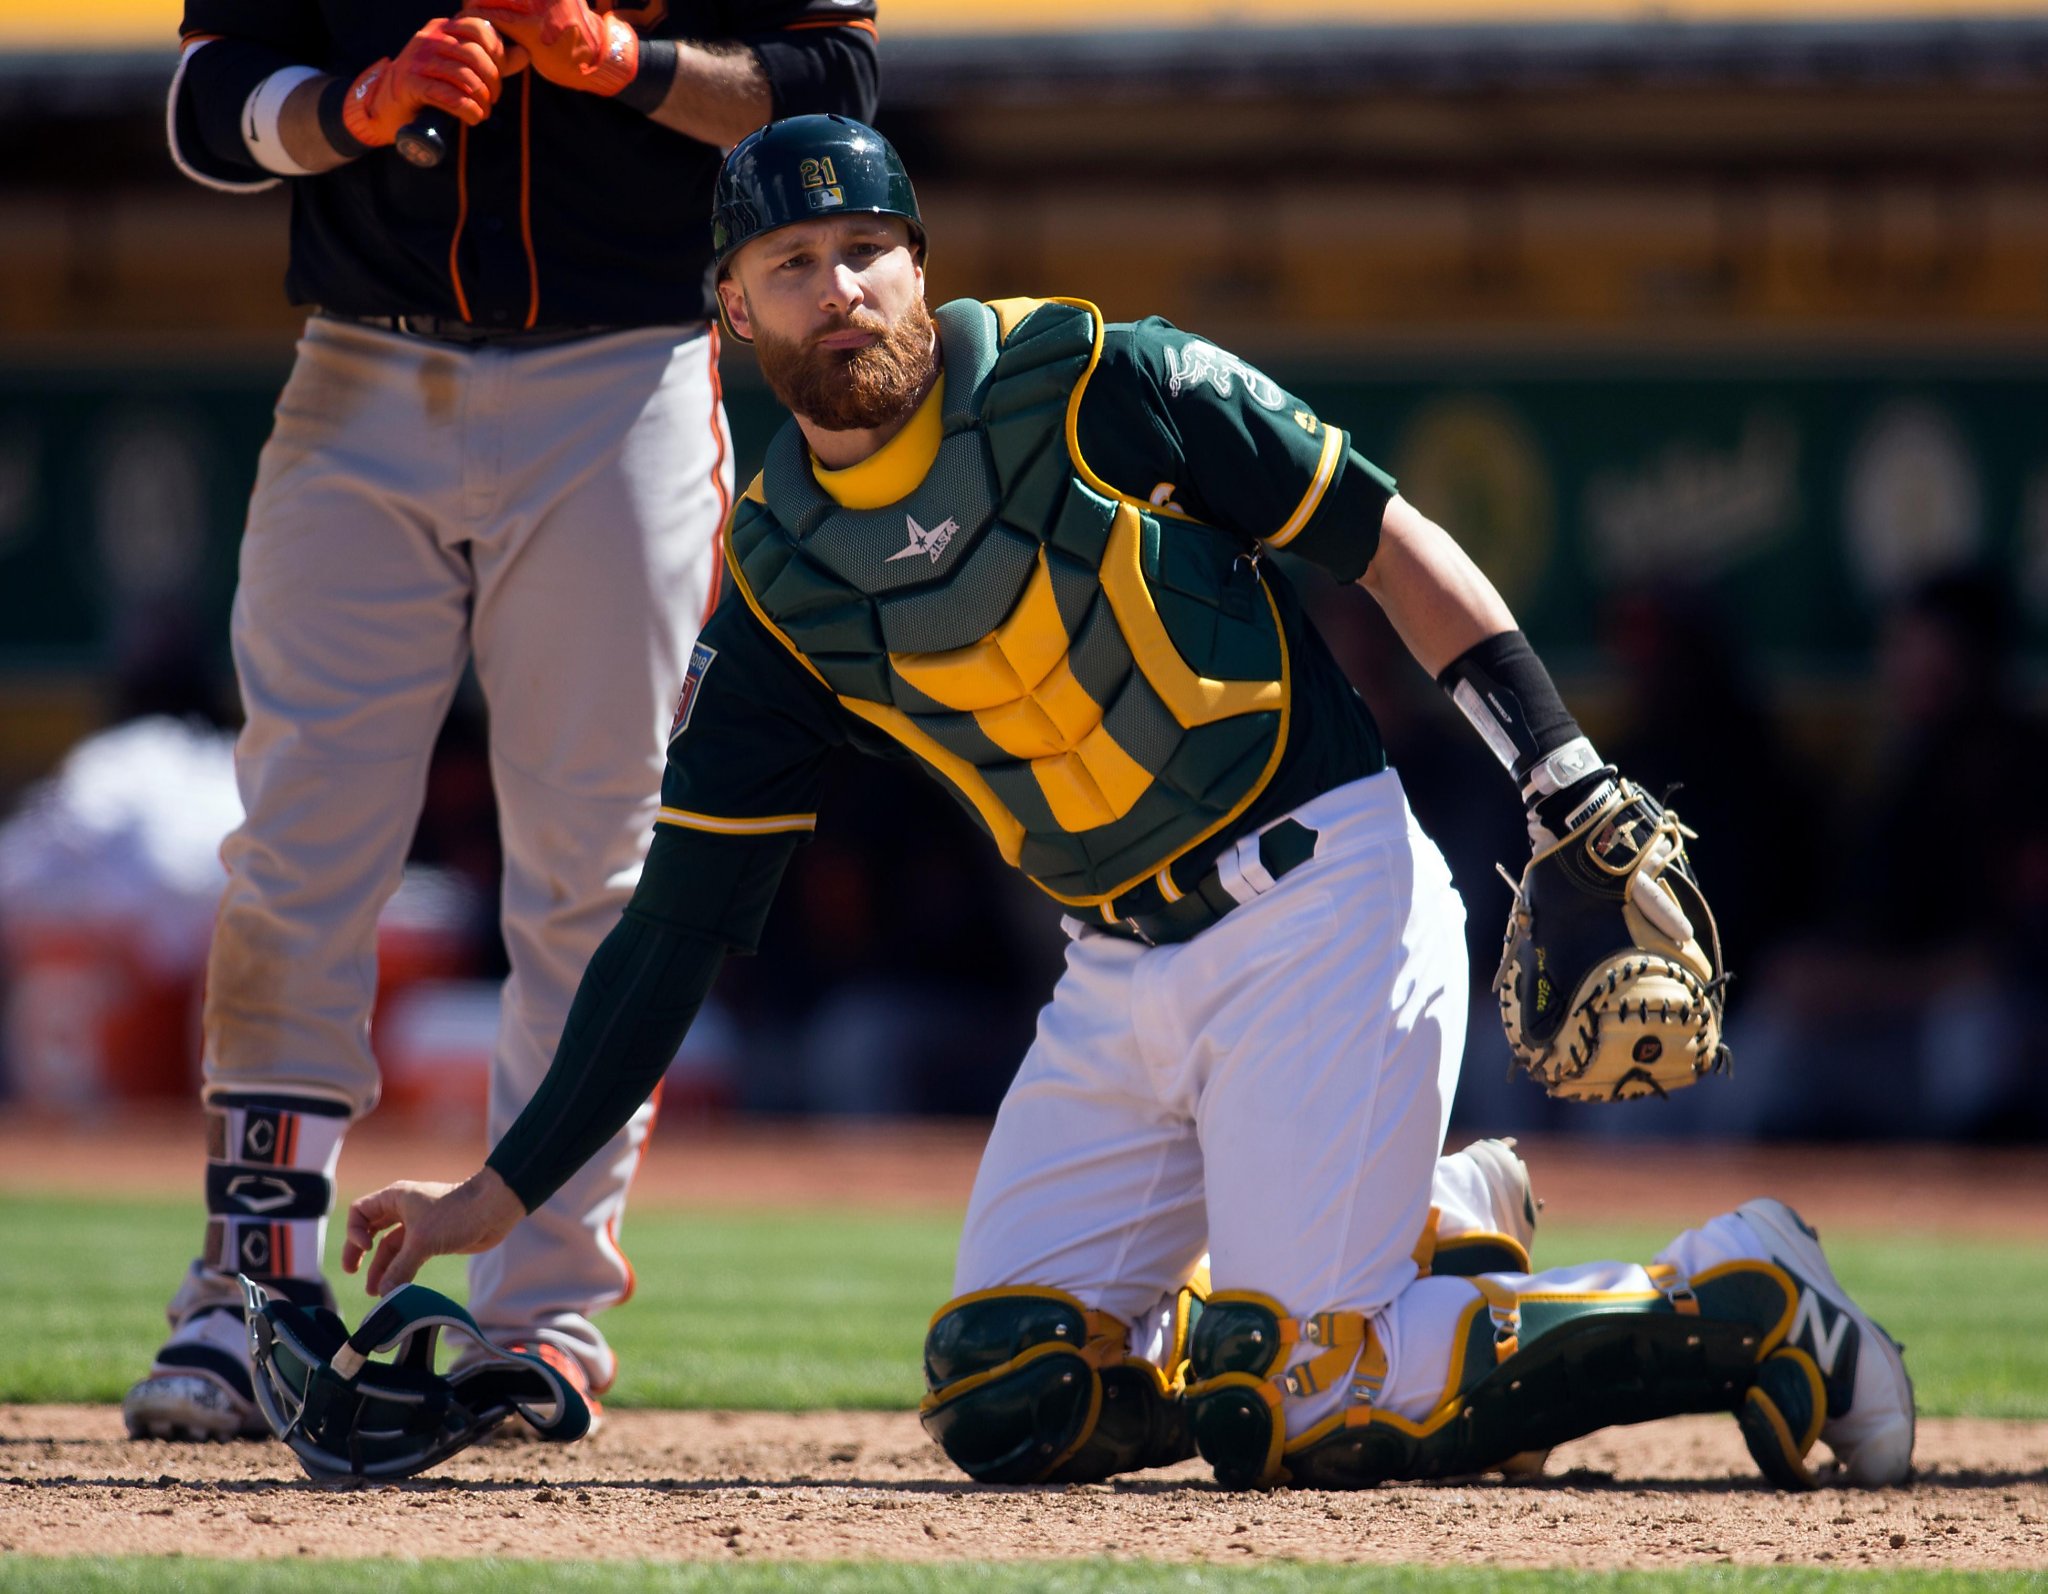 10 things you might not know about Jonathan Lucroy, including his